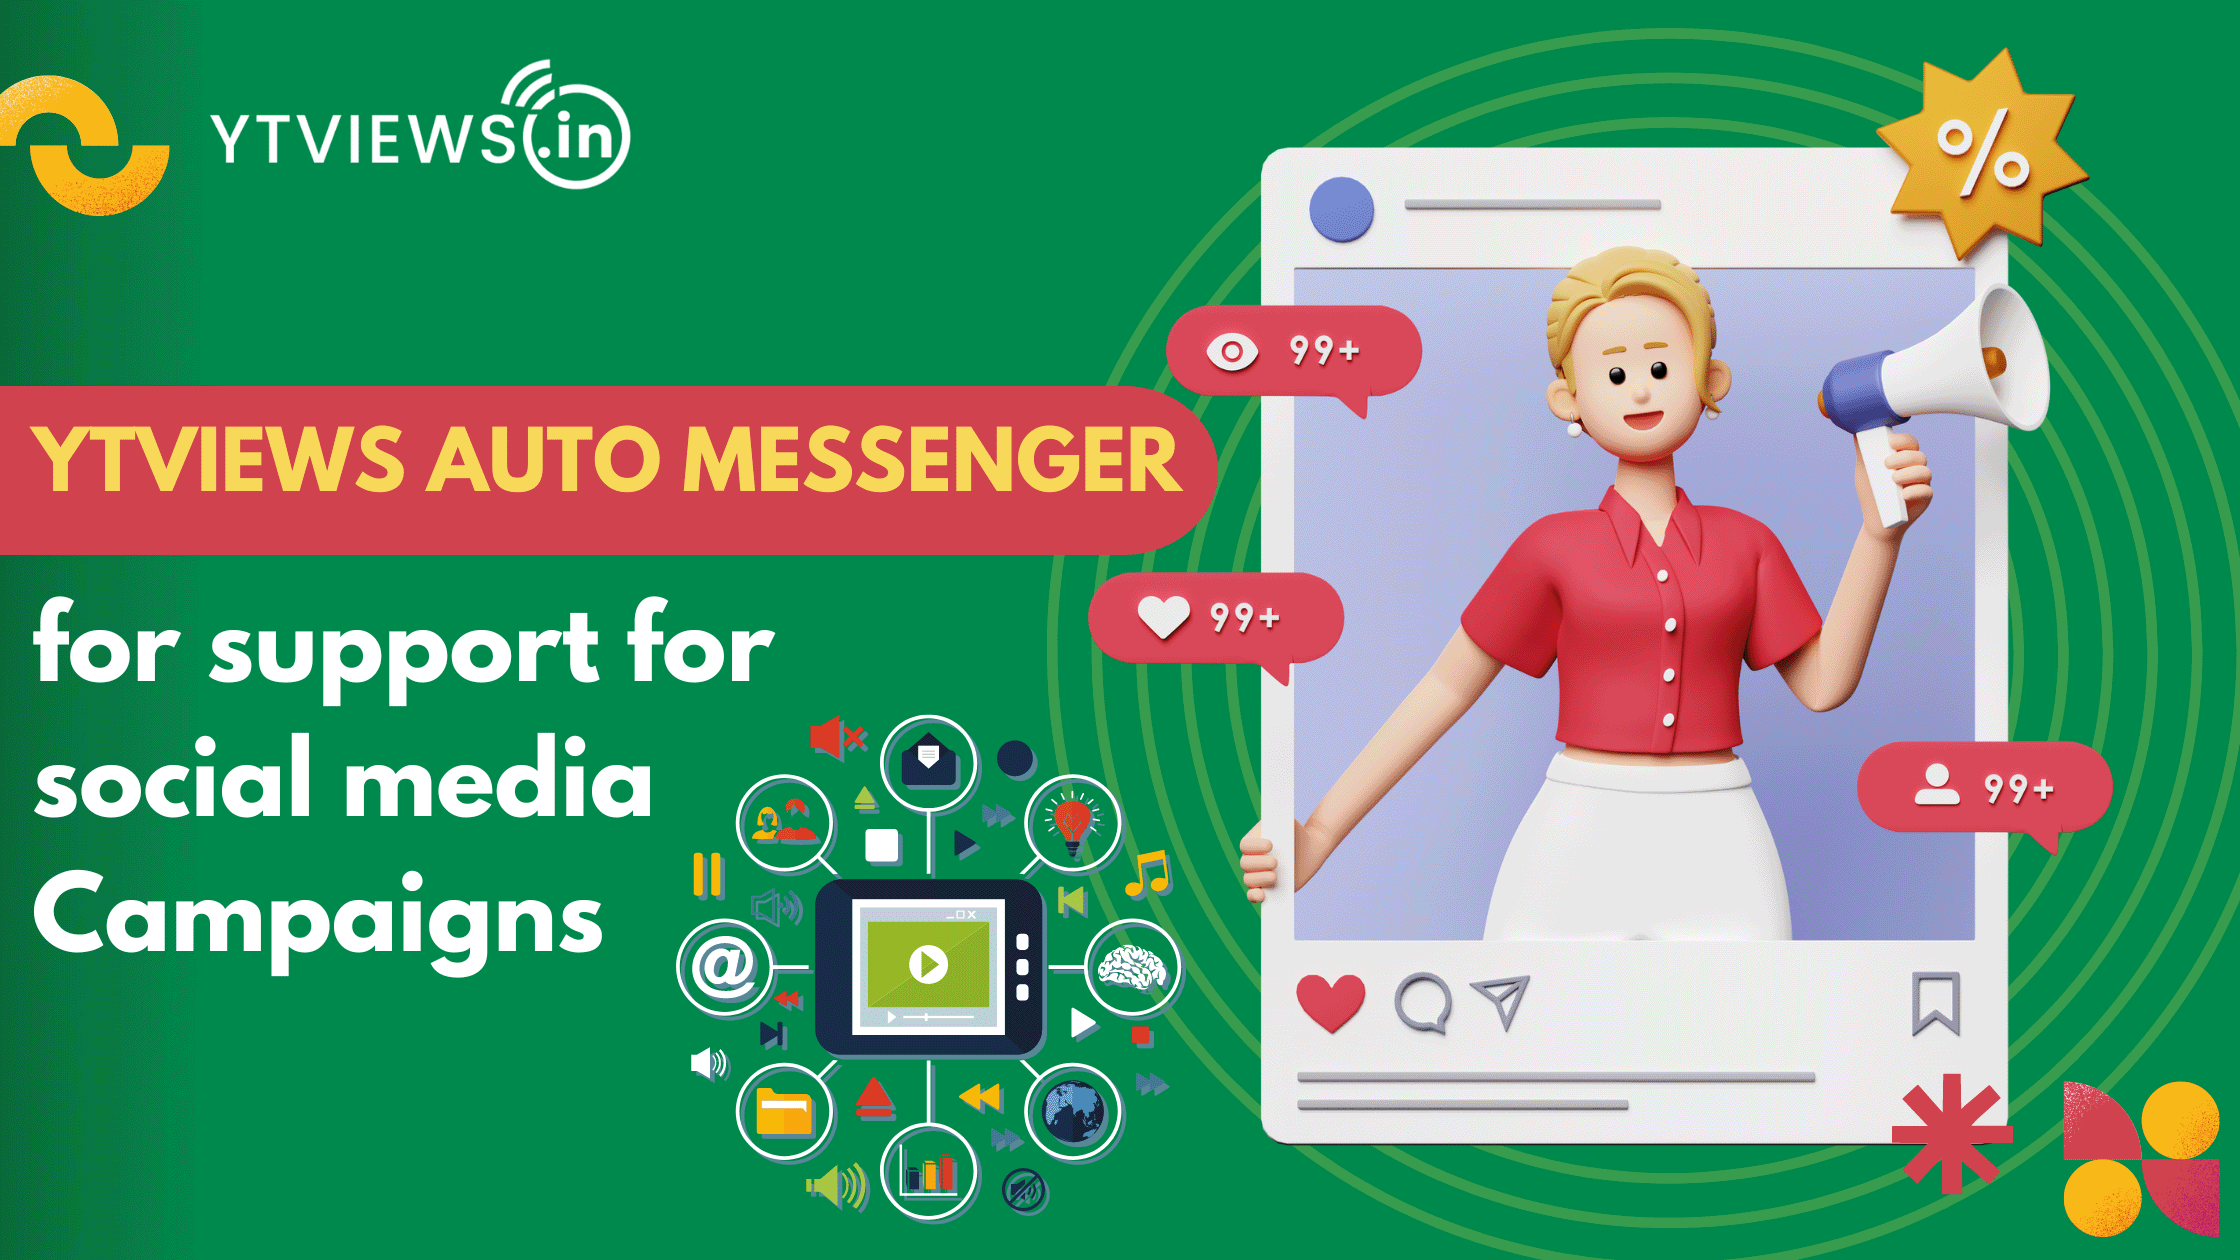 Auto Messaging tools: Ytviews provides an overview of how such tools can help you to interact with your customers on social media platforms